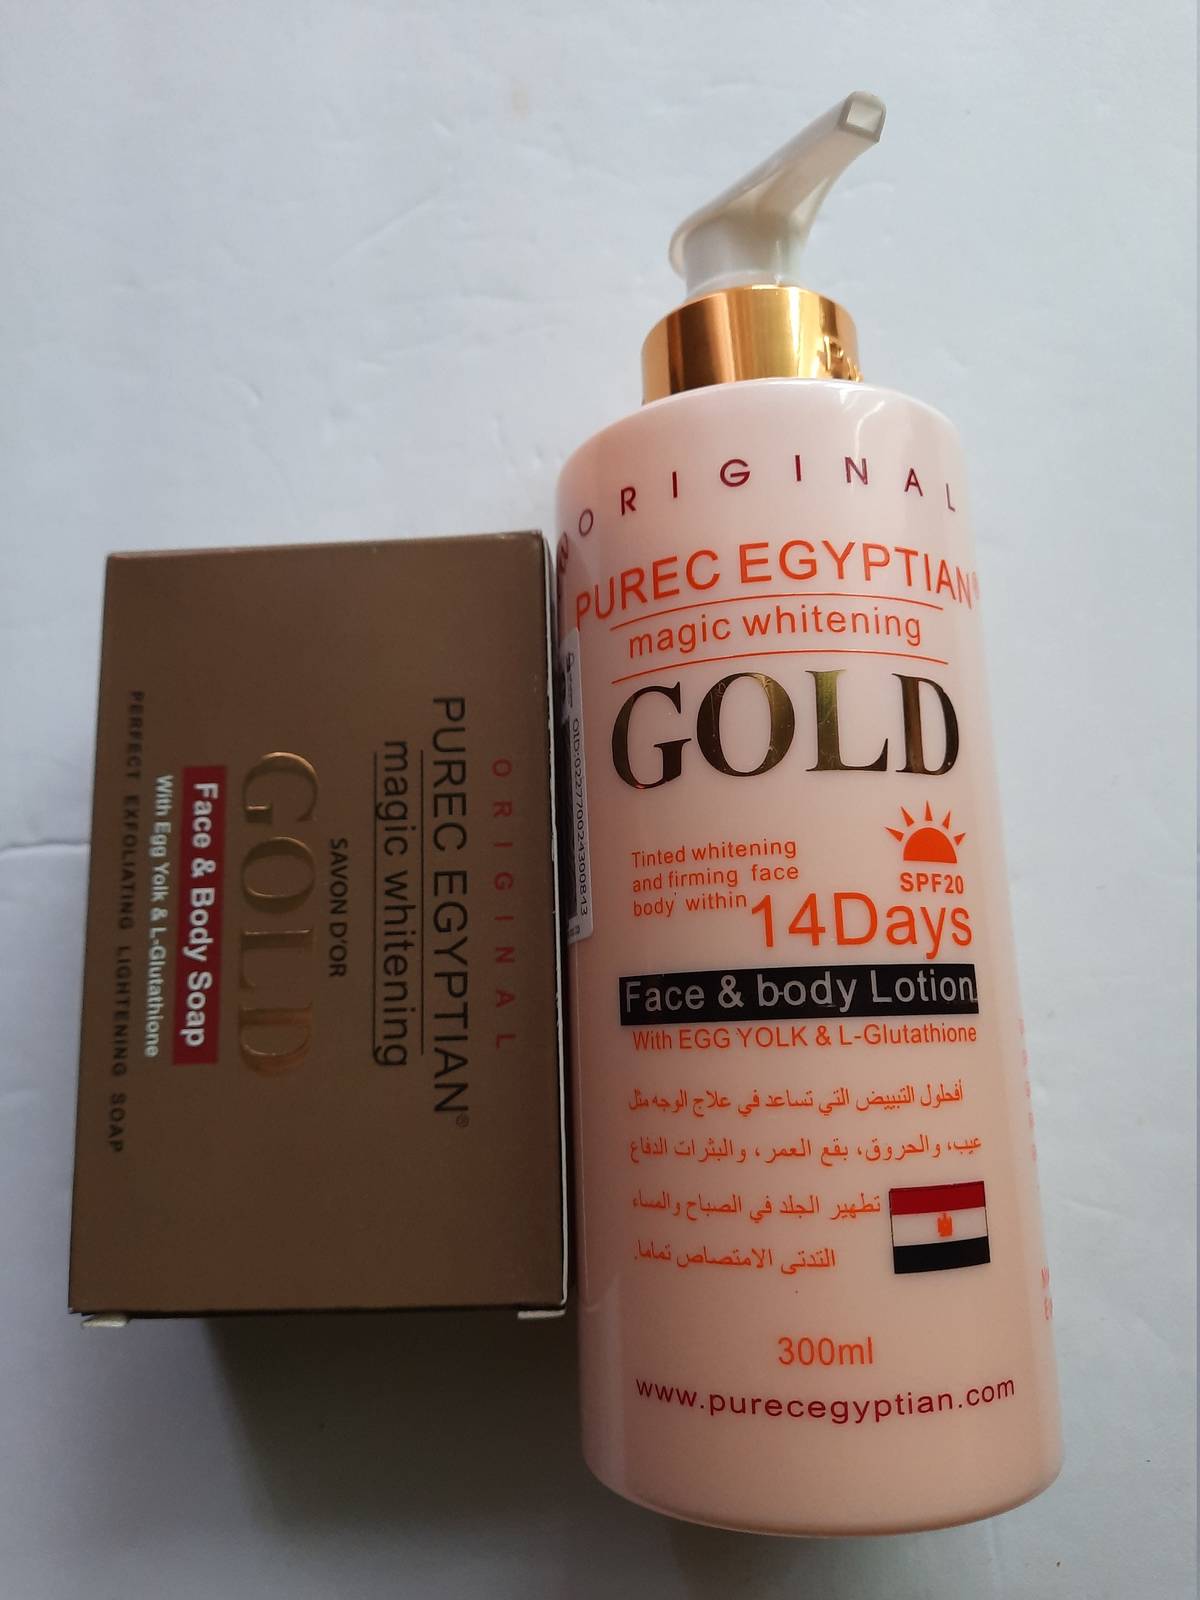 Primary image for Purec Egyptian magic gold body lotion and soap